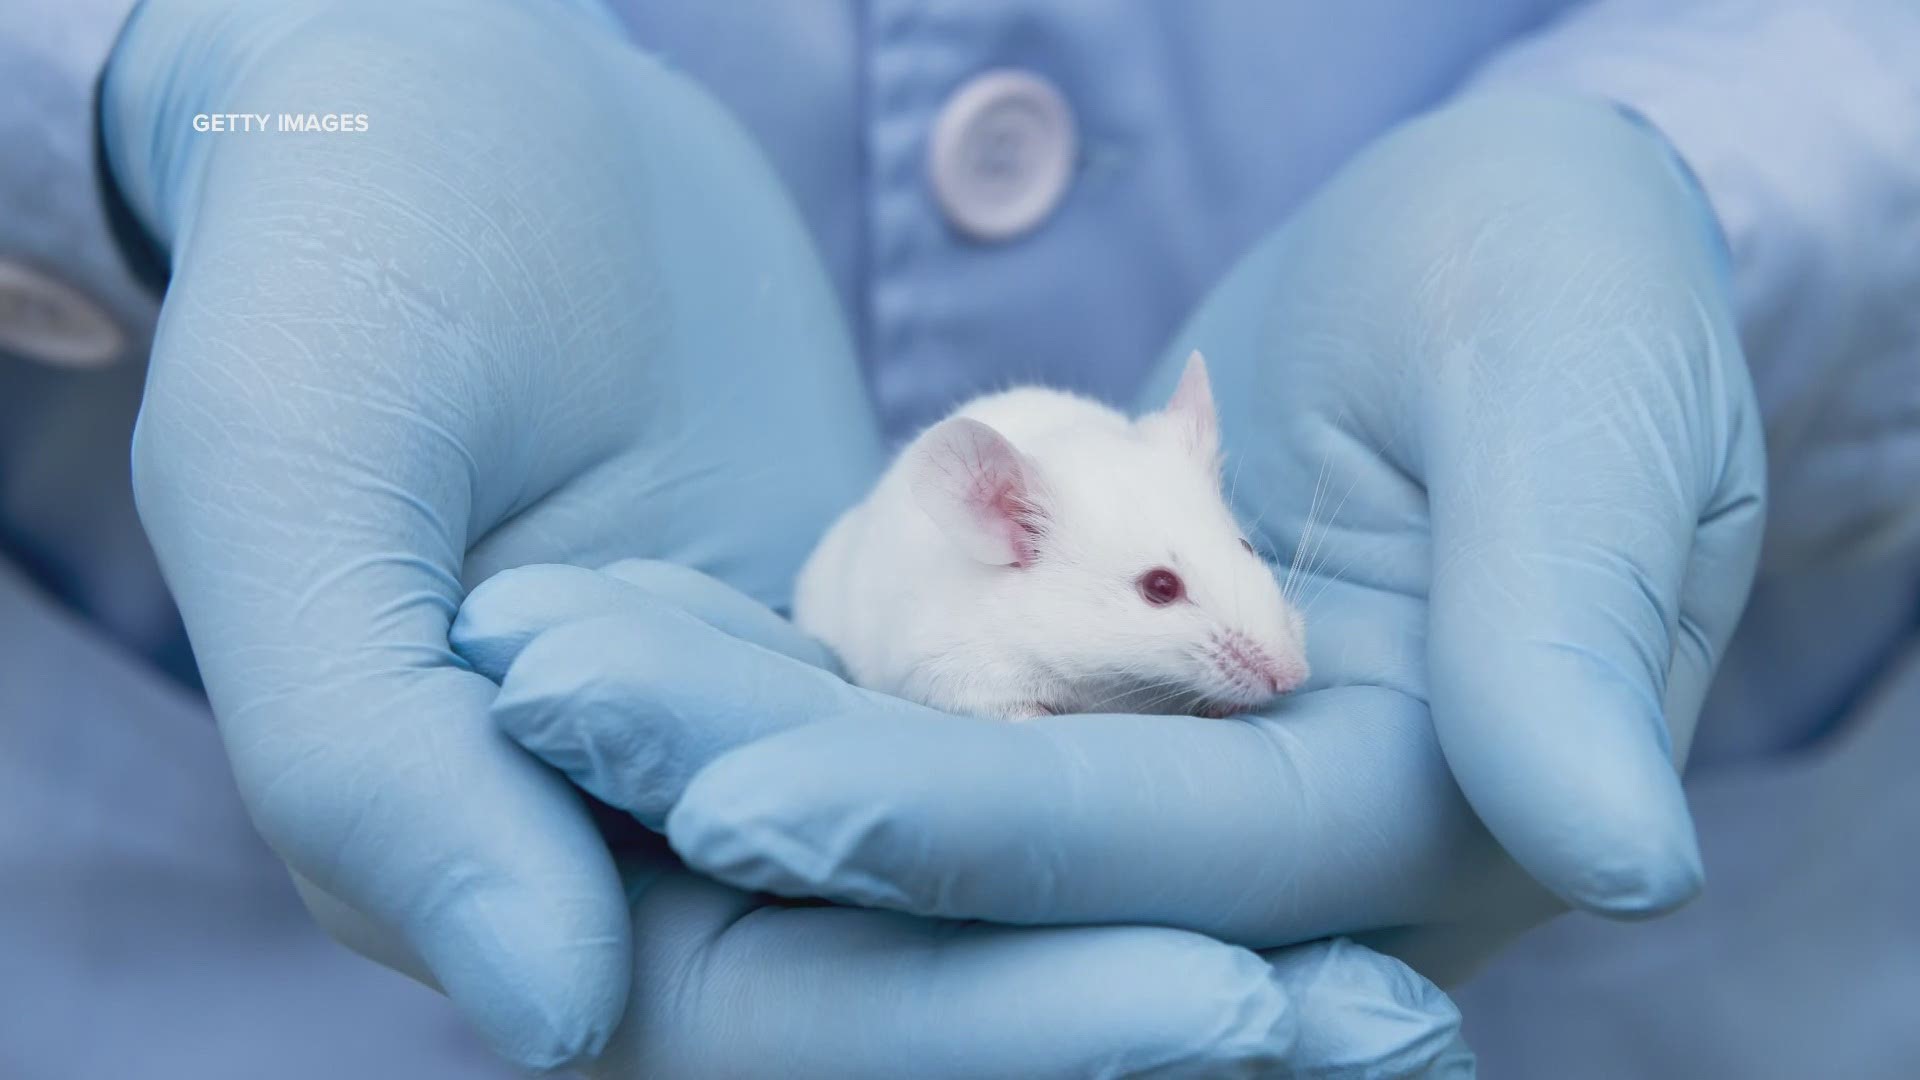 Maine lab genetically modifies mice for COVID-19 research